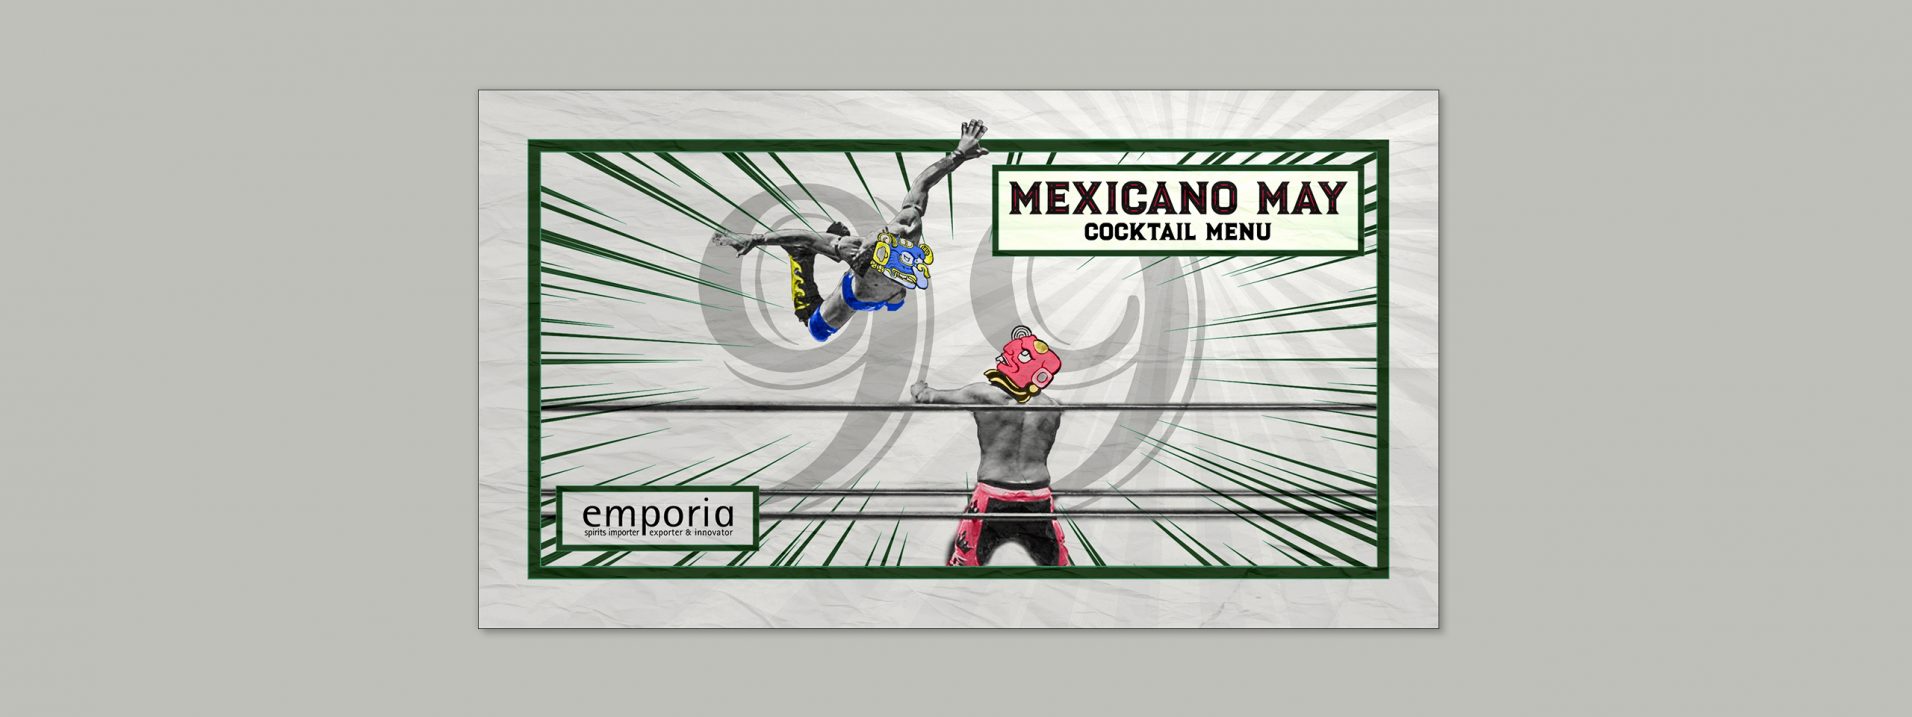 Emporia Brands - Mexicano May Cocktail Menu designed by Dephined